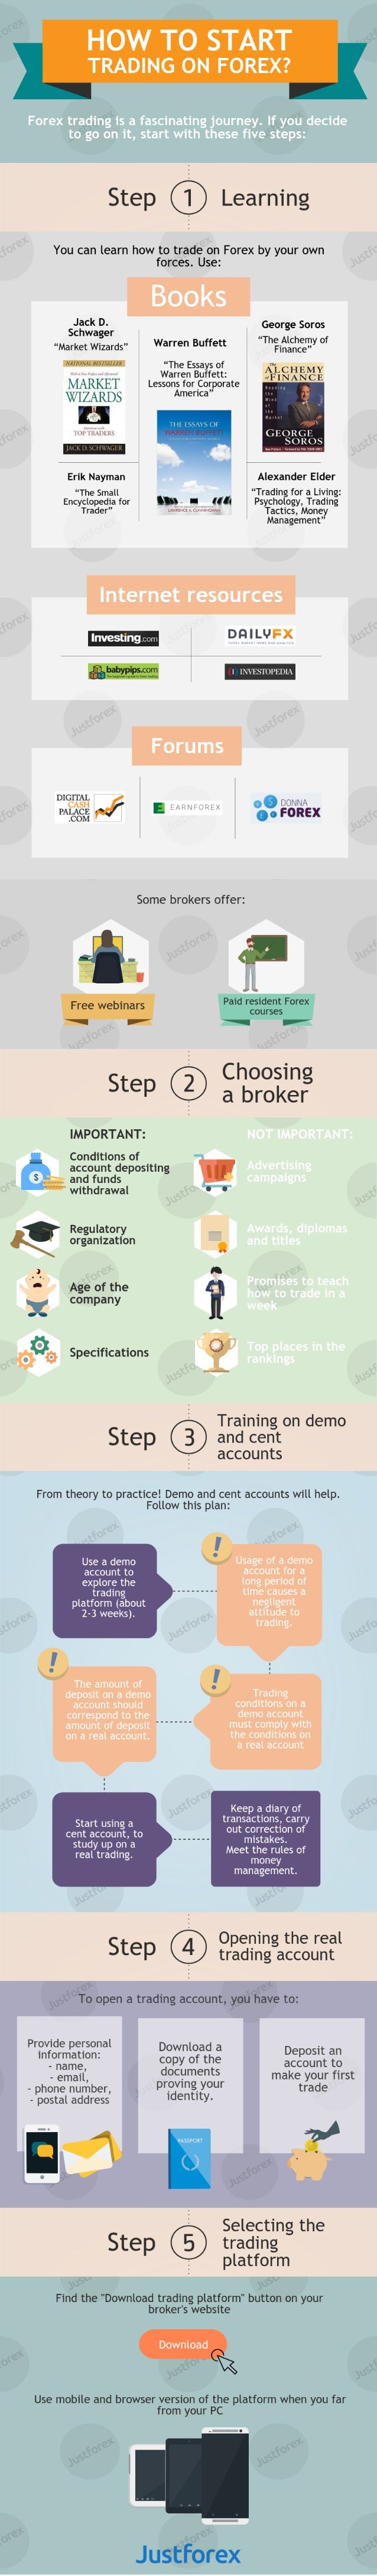 infographic of the how to start trading on the forex market